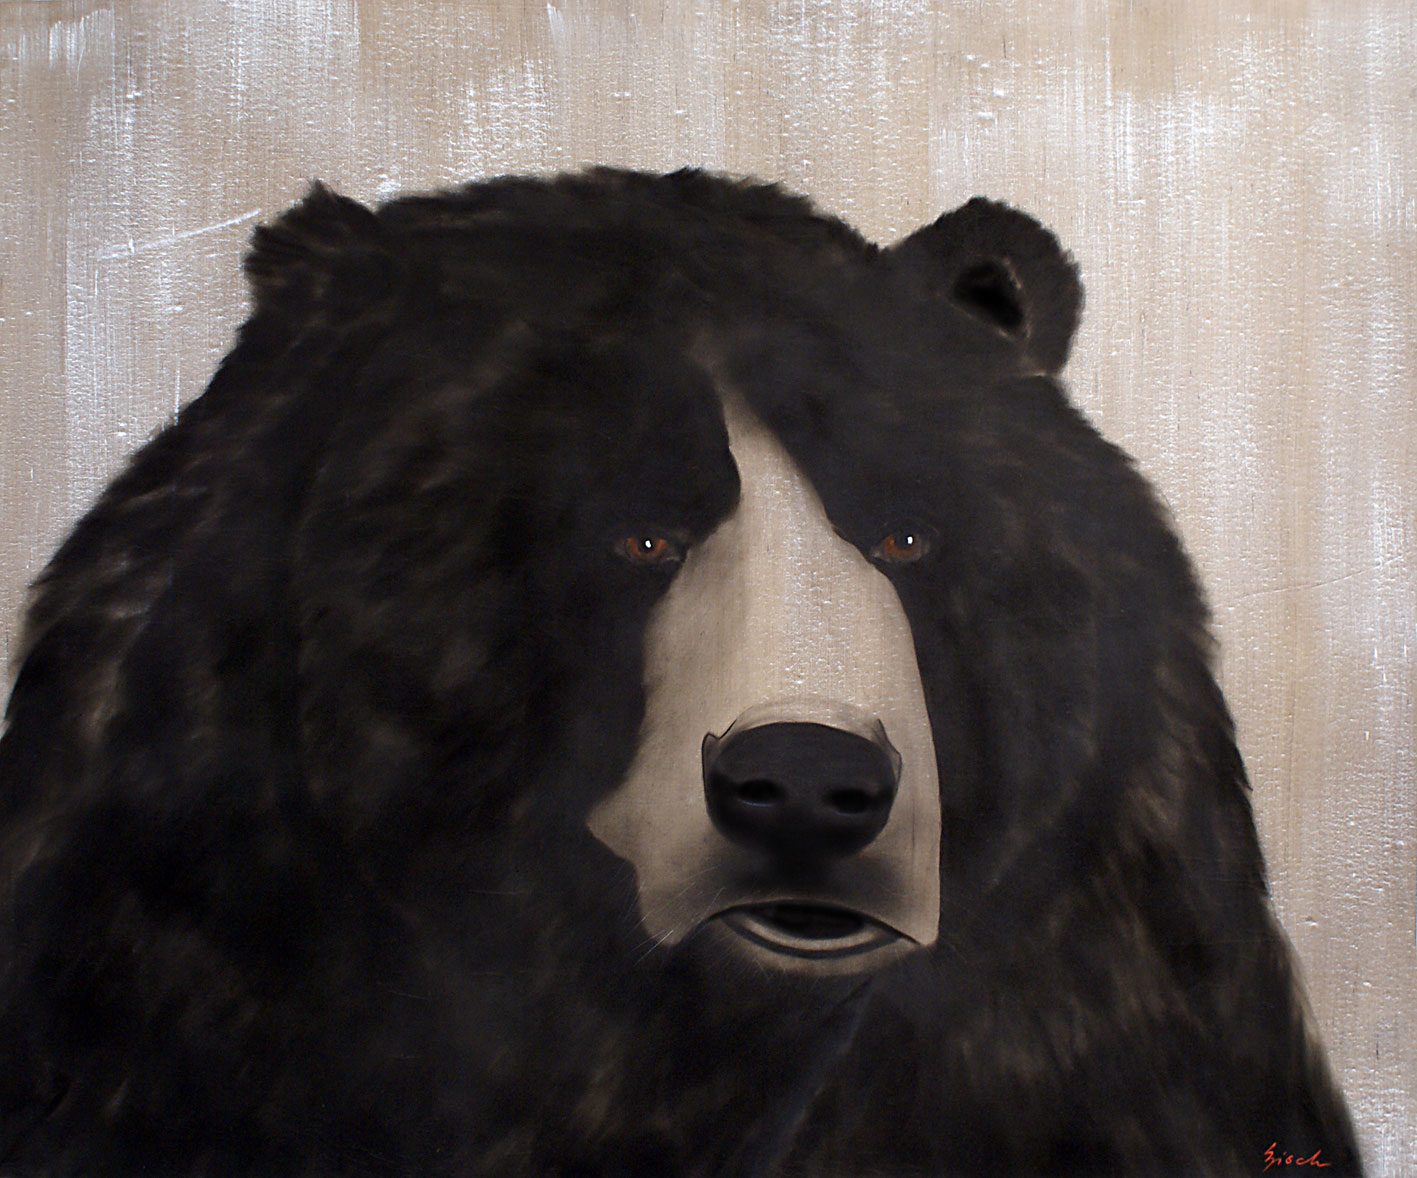 GRIZZLY-BEAR- grizzly-brown-bear- Thierry Bisch Contemporary painter animals painting art decoration nature biodiversity conservation